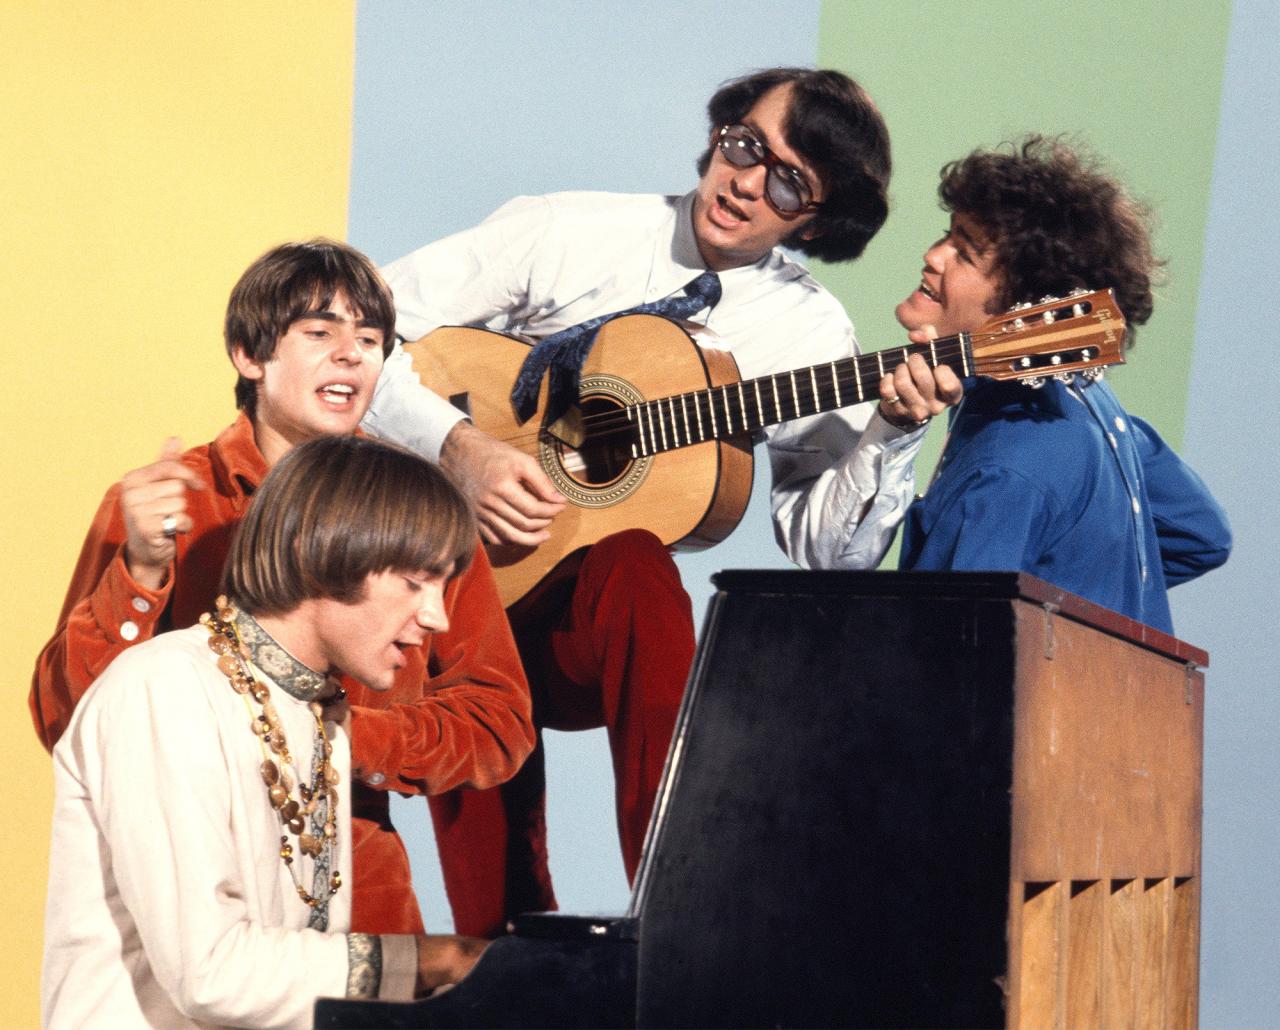 The Monkees on the set of their television show, 1967.